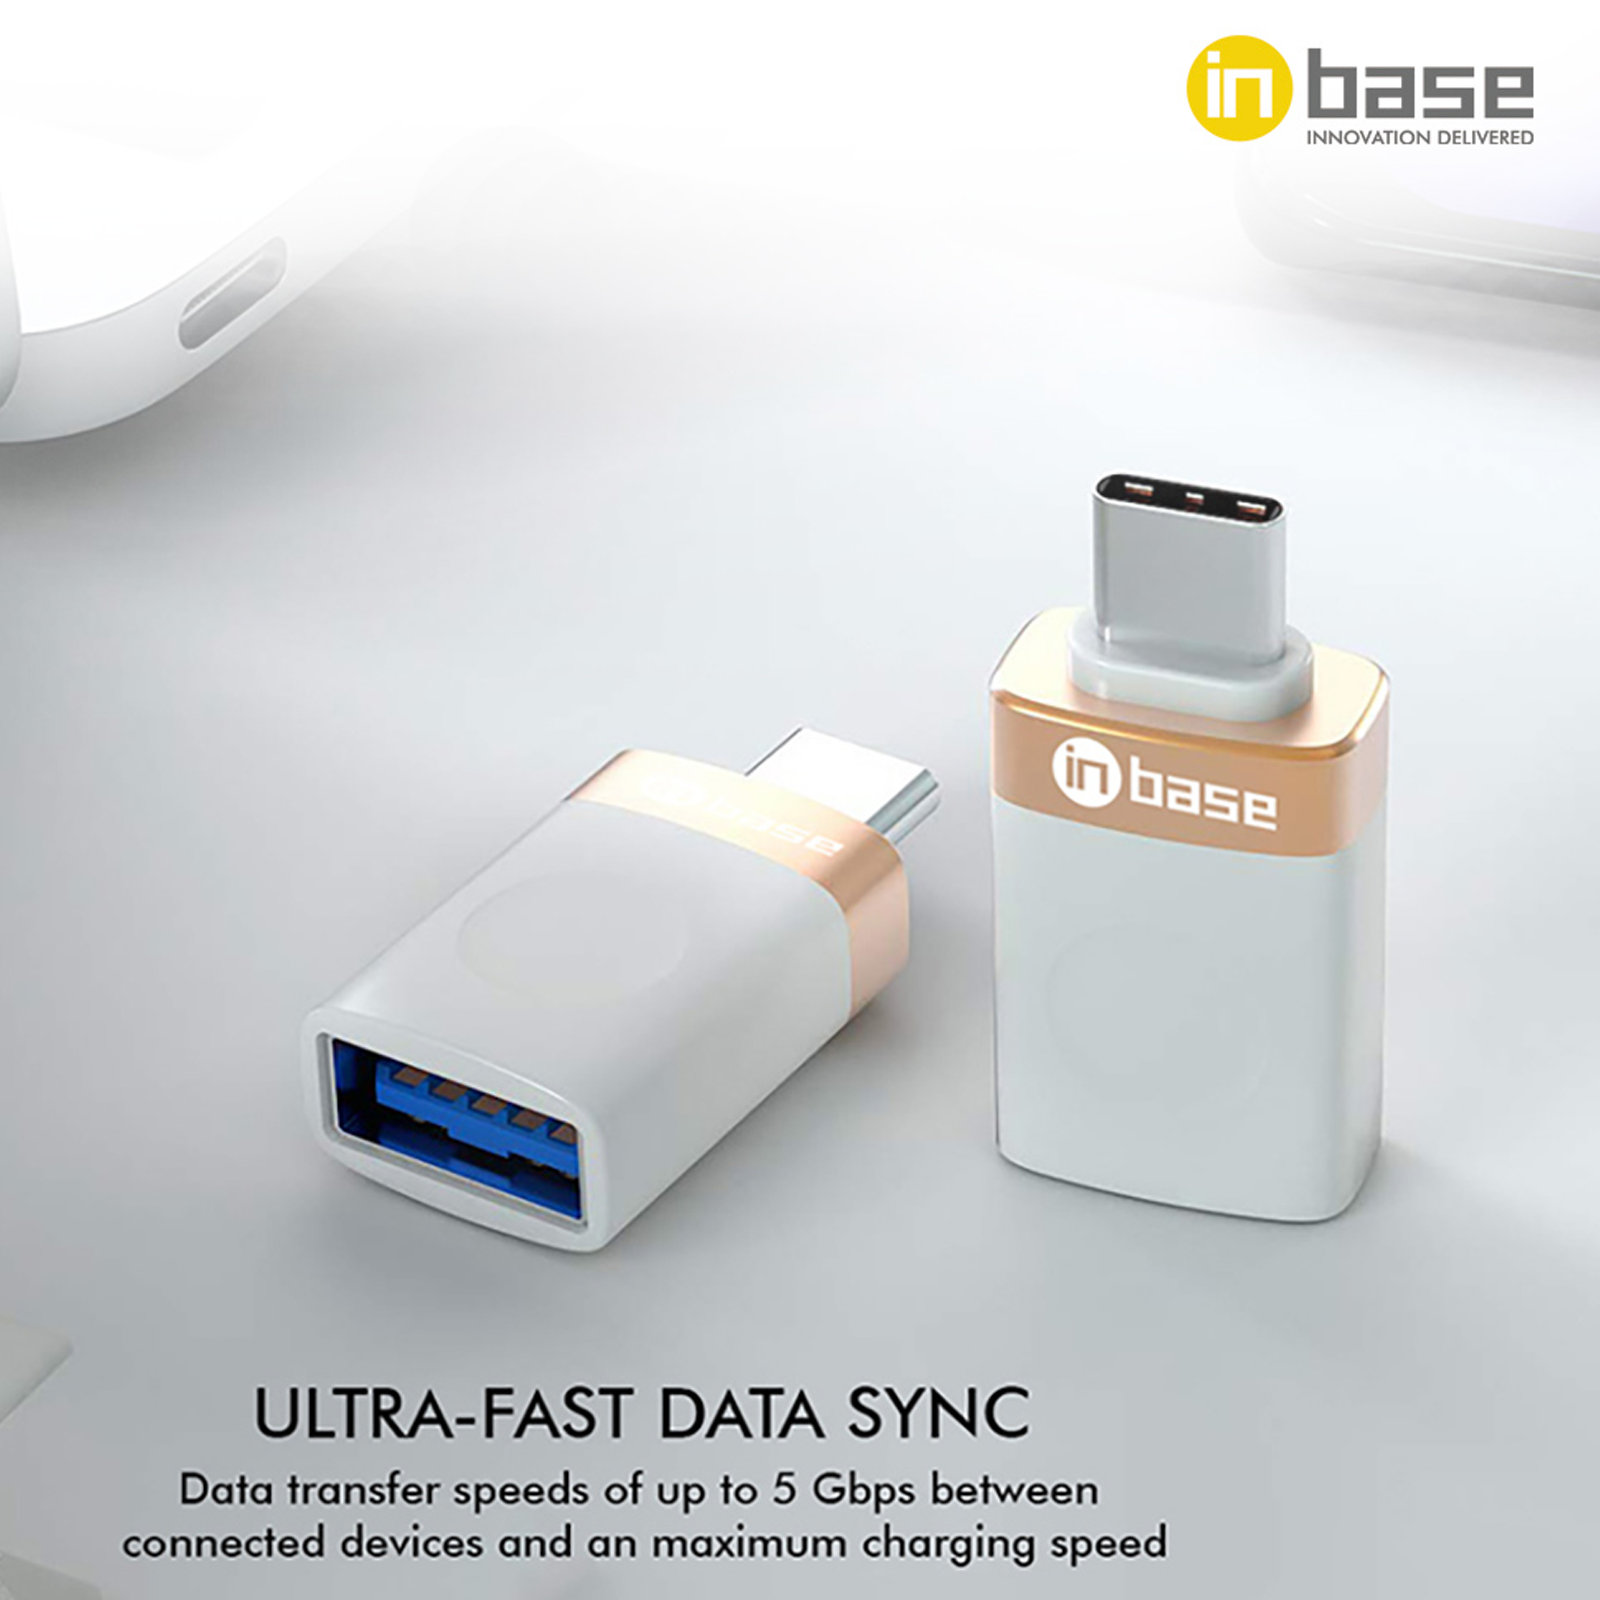 Inbase USB 3.1 Type-A to USB 3.1 Type-C Data Transfer OTG Connector (Safe and Durable, IB-2048, Silver)_3